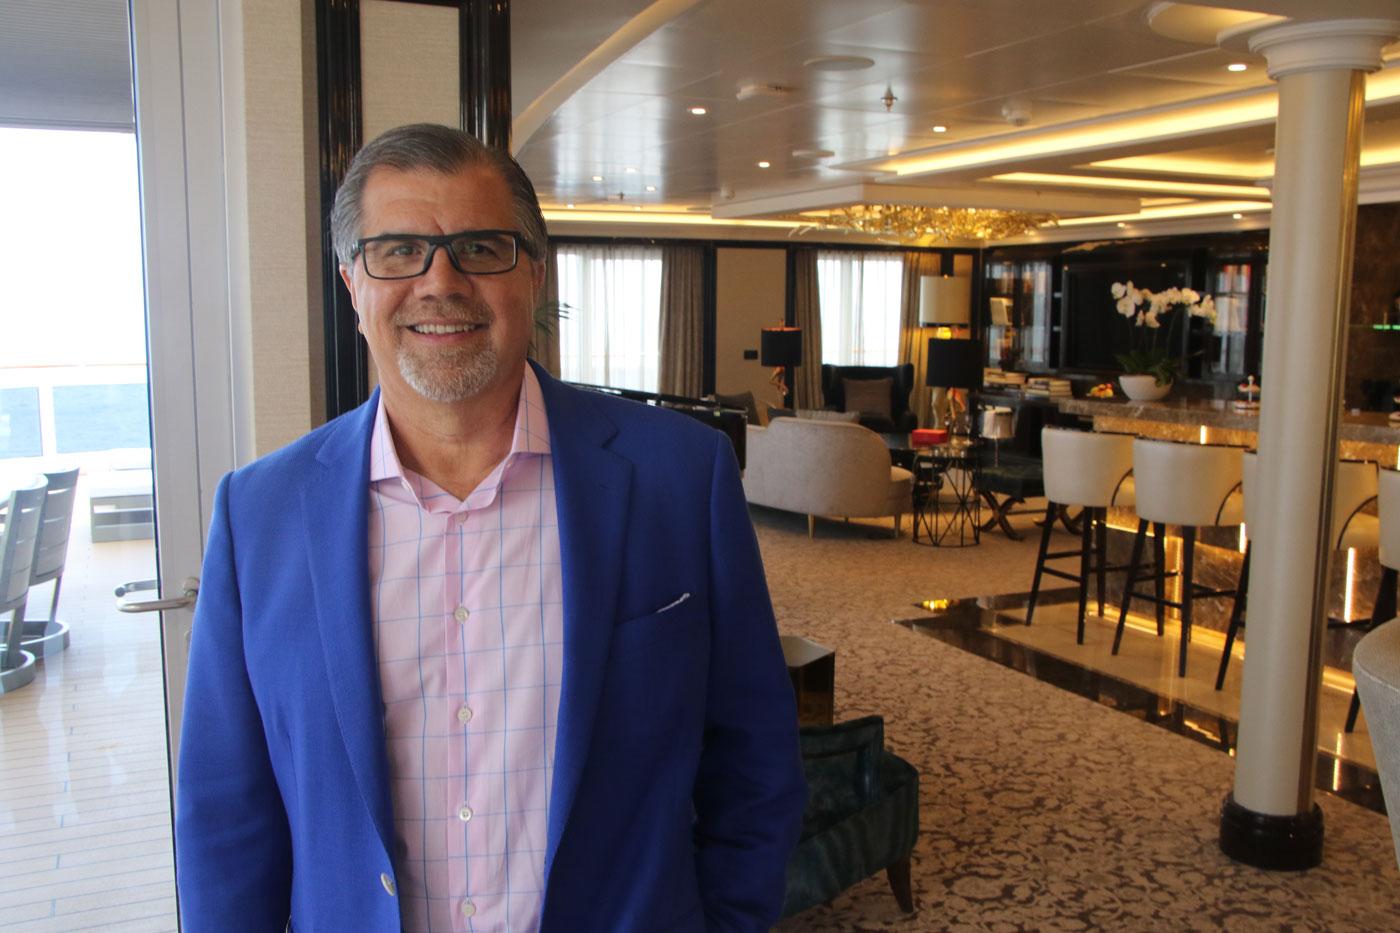 Frank del Rio, CEO of the parent company of Regent Seven Seas, in the extravagant Regent Suite. (Courtesy of Martin Gorst)